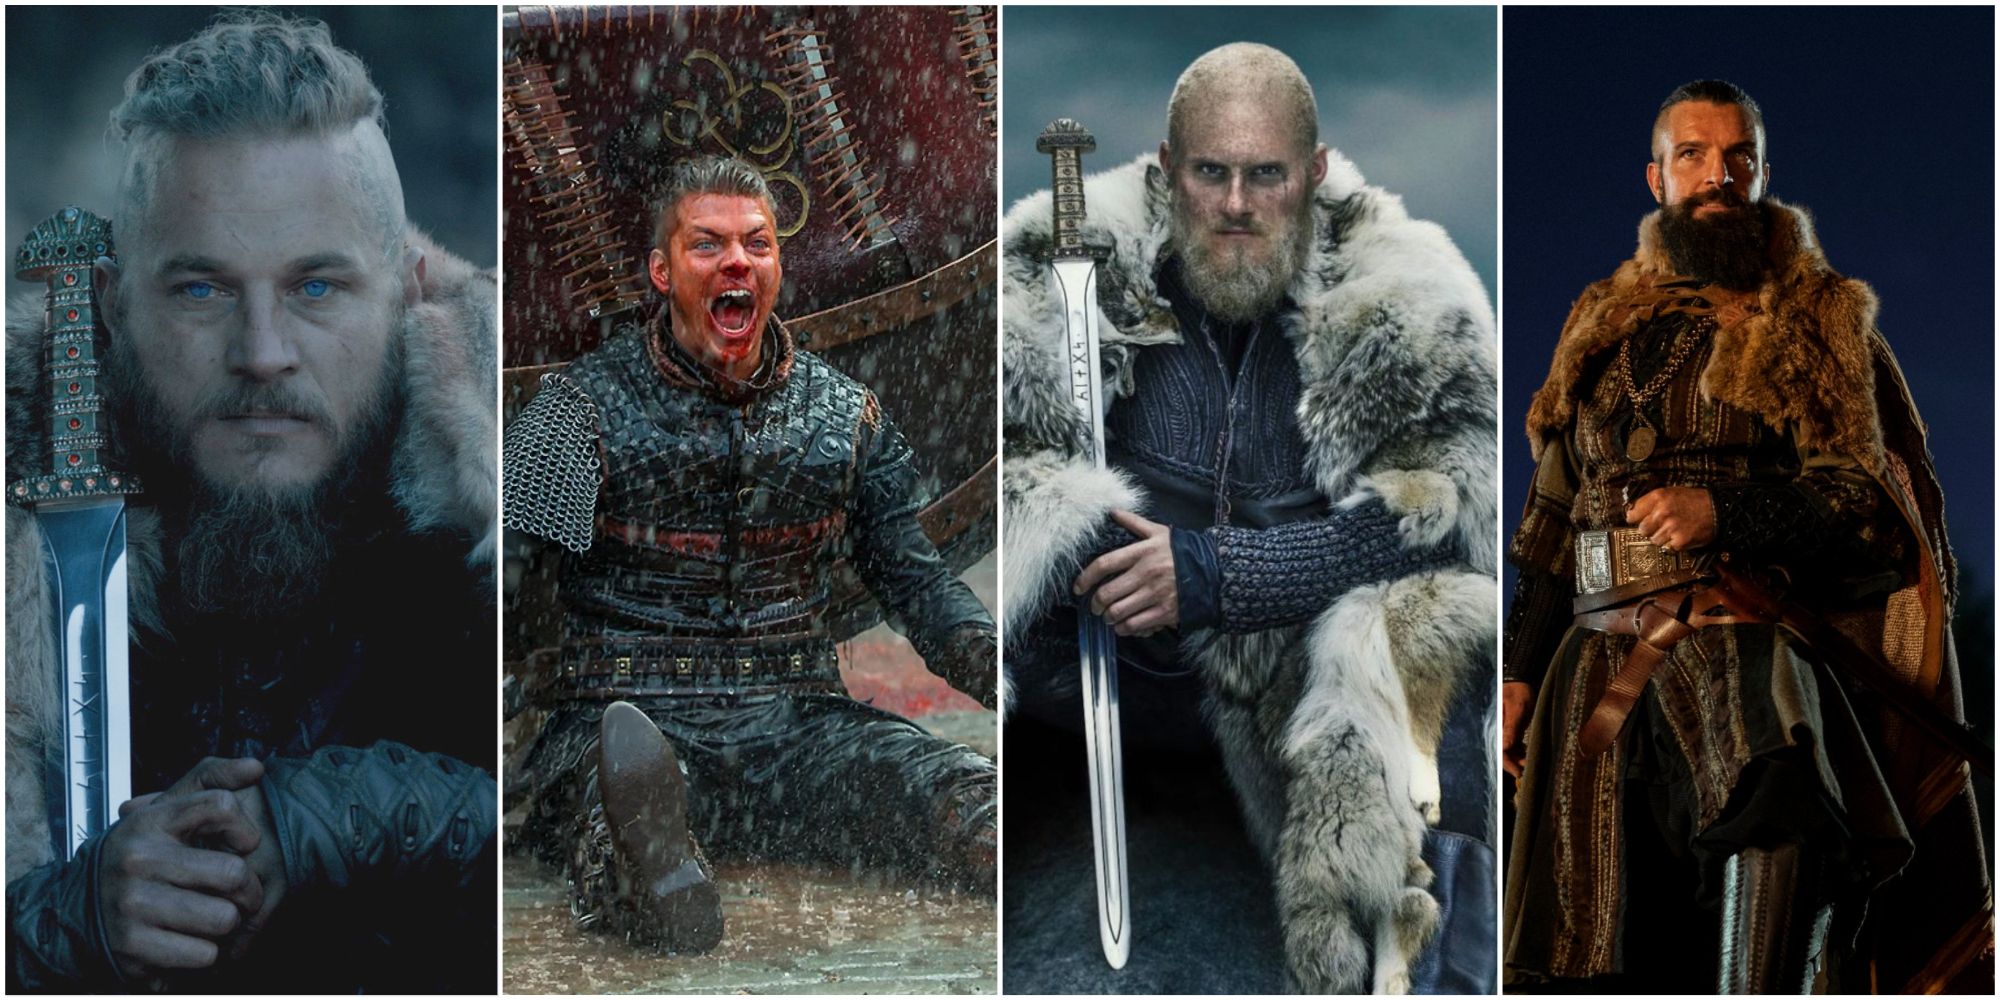 Ragnar, Ivar, and Bjorn in Vikings and Canute in Valhalla